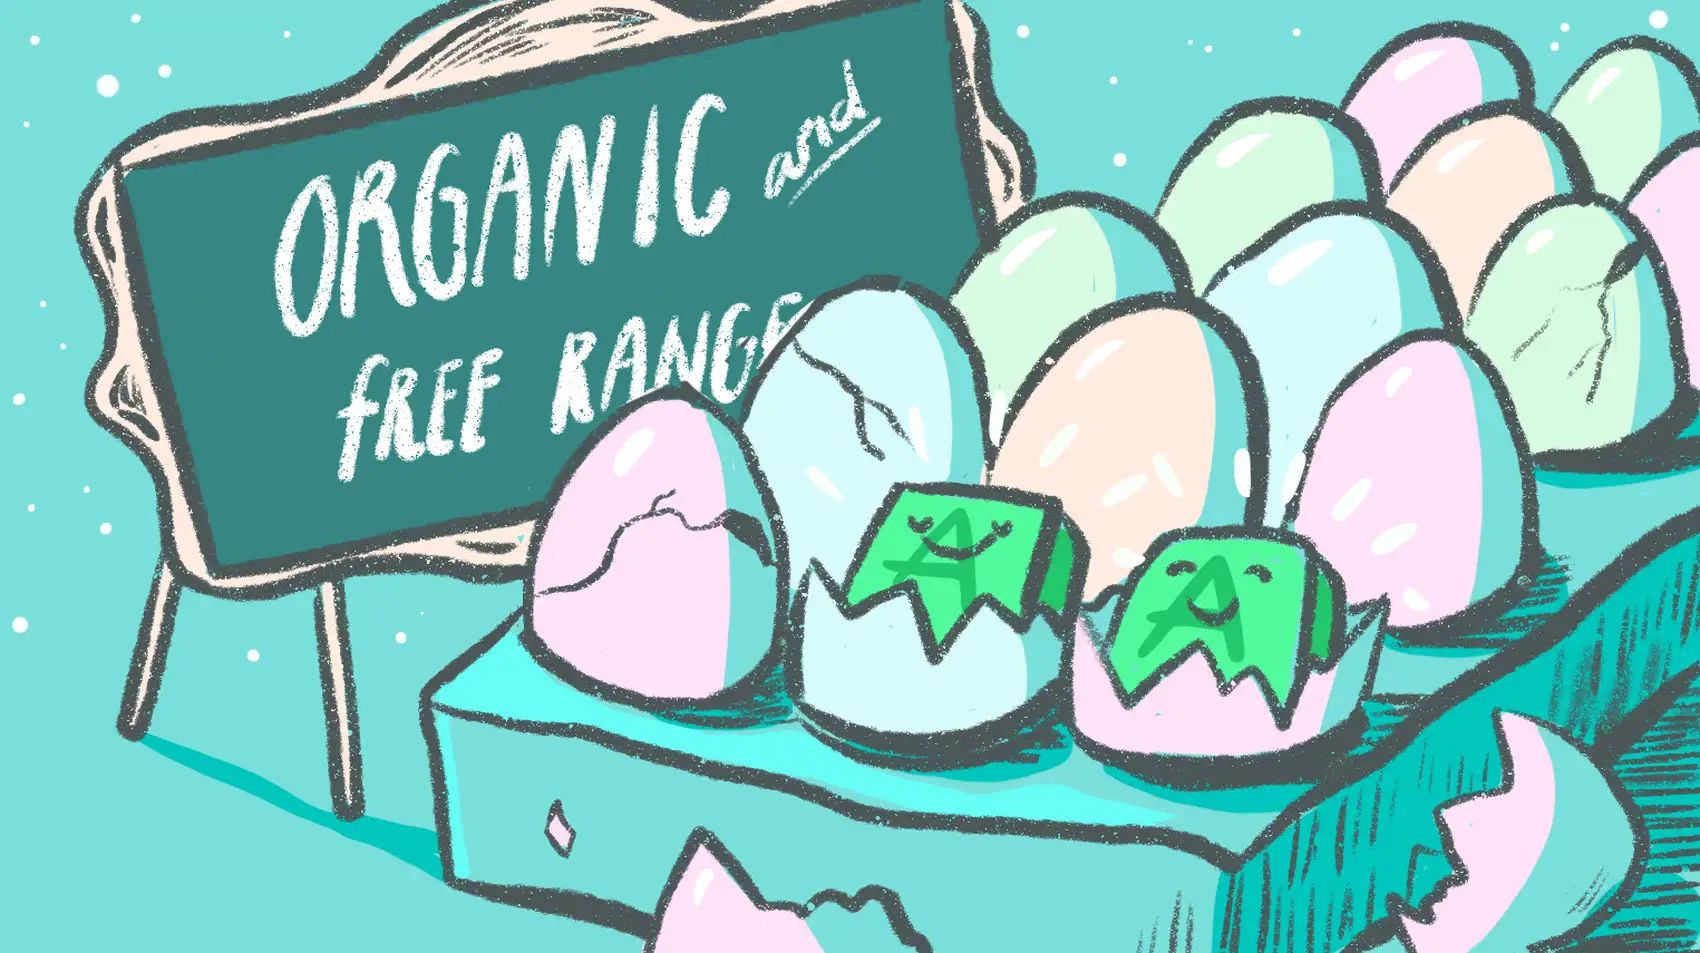 Sign reading "organic and free range" on a stand behind a carton of eggs. Inside each egg is an application.